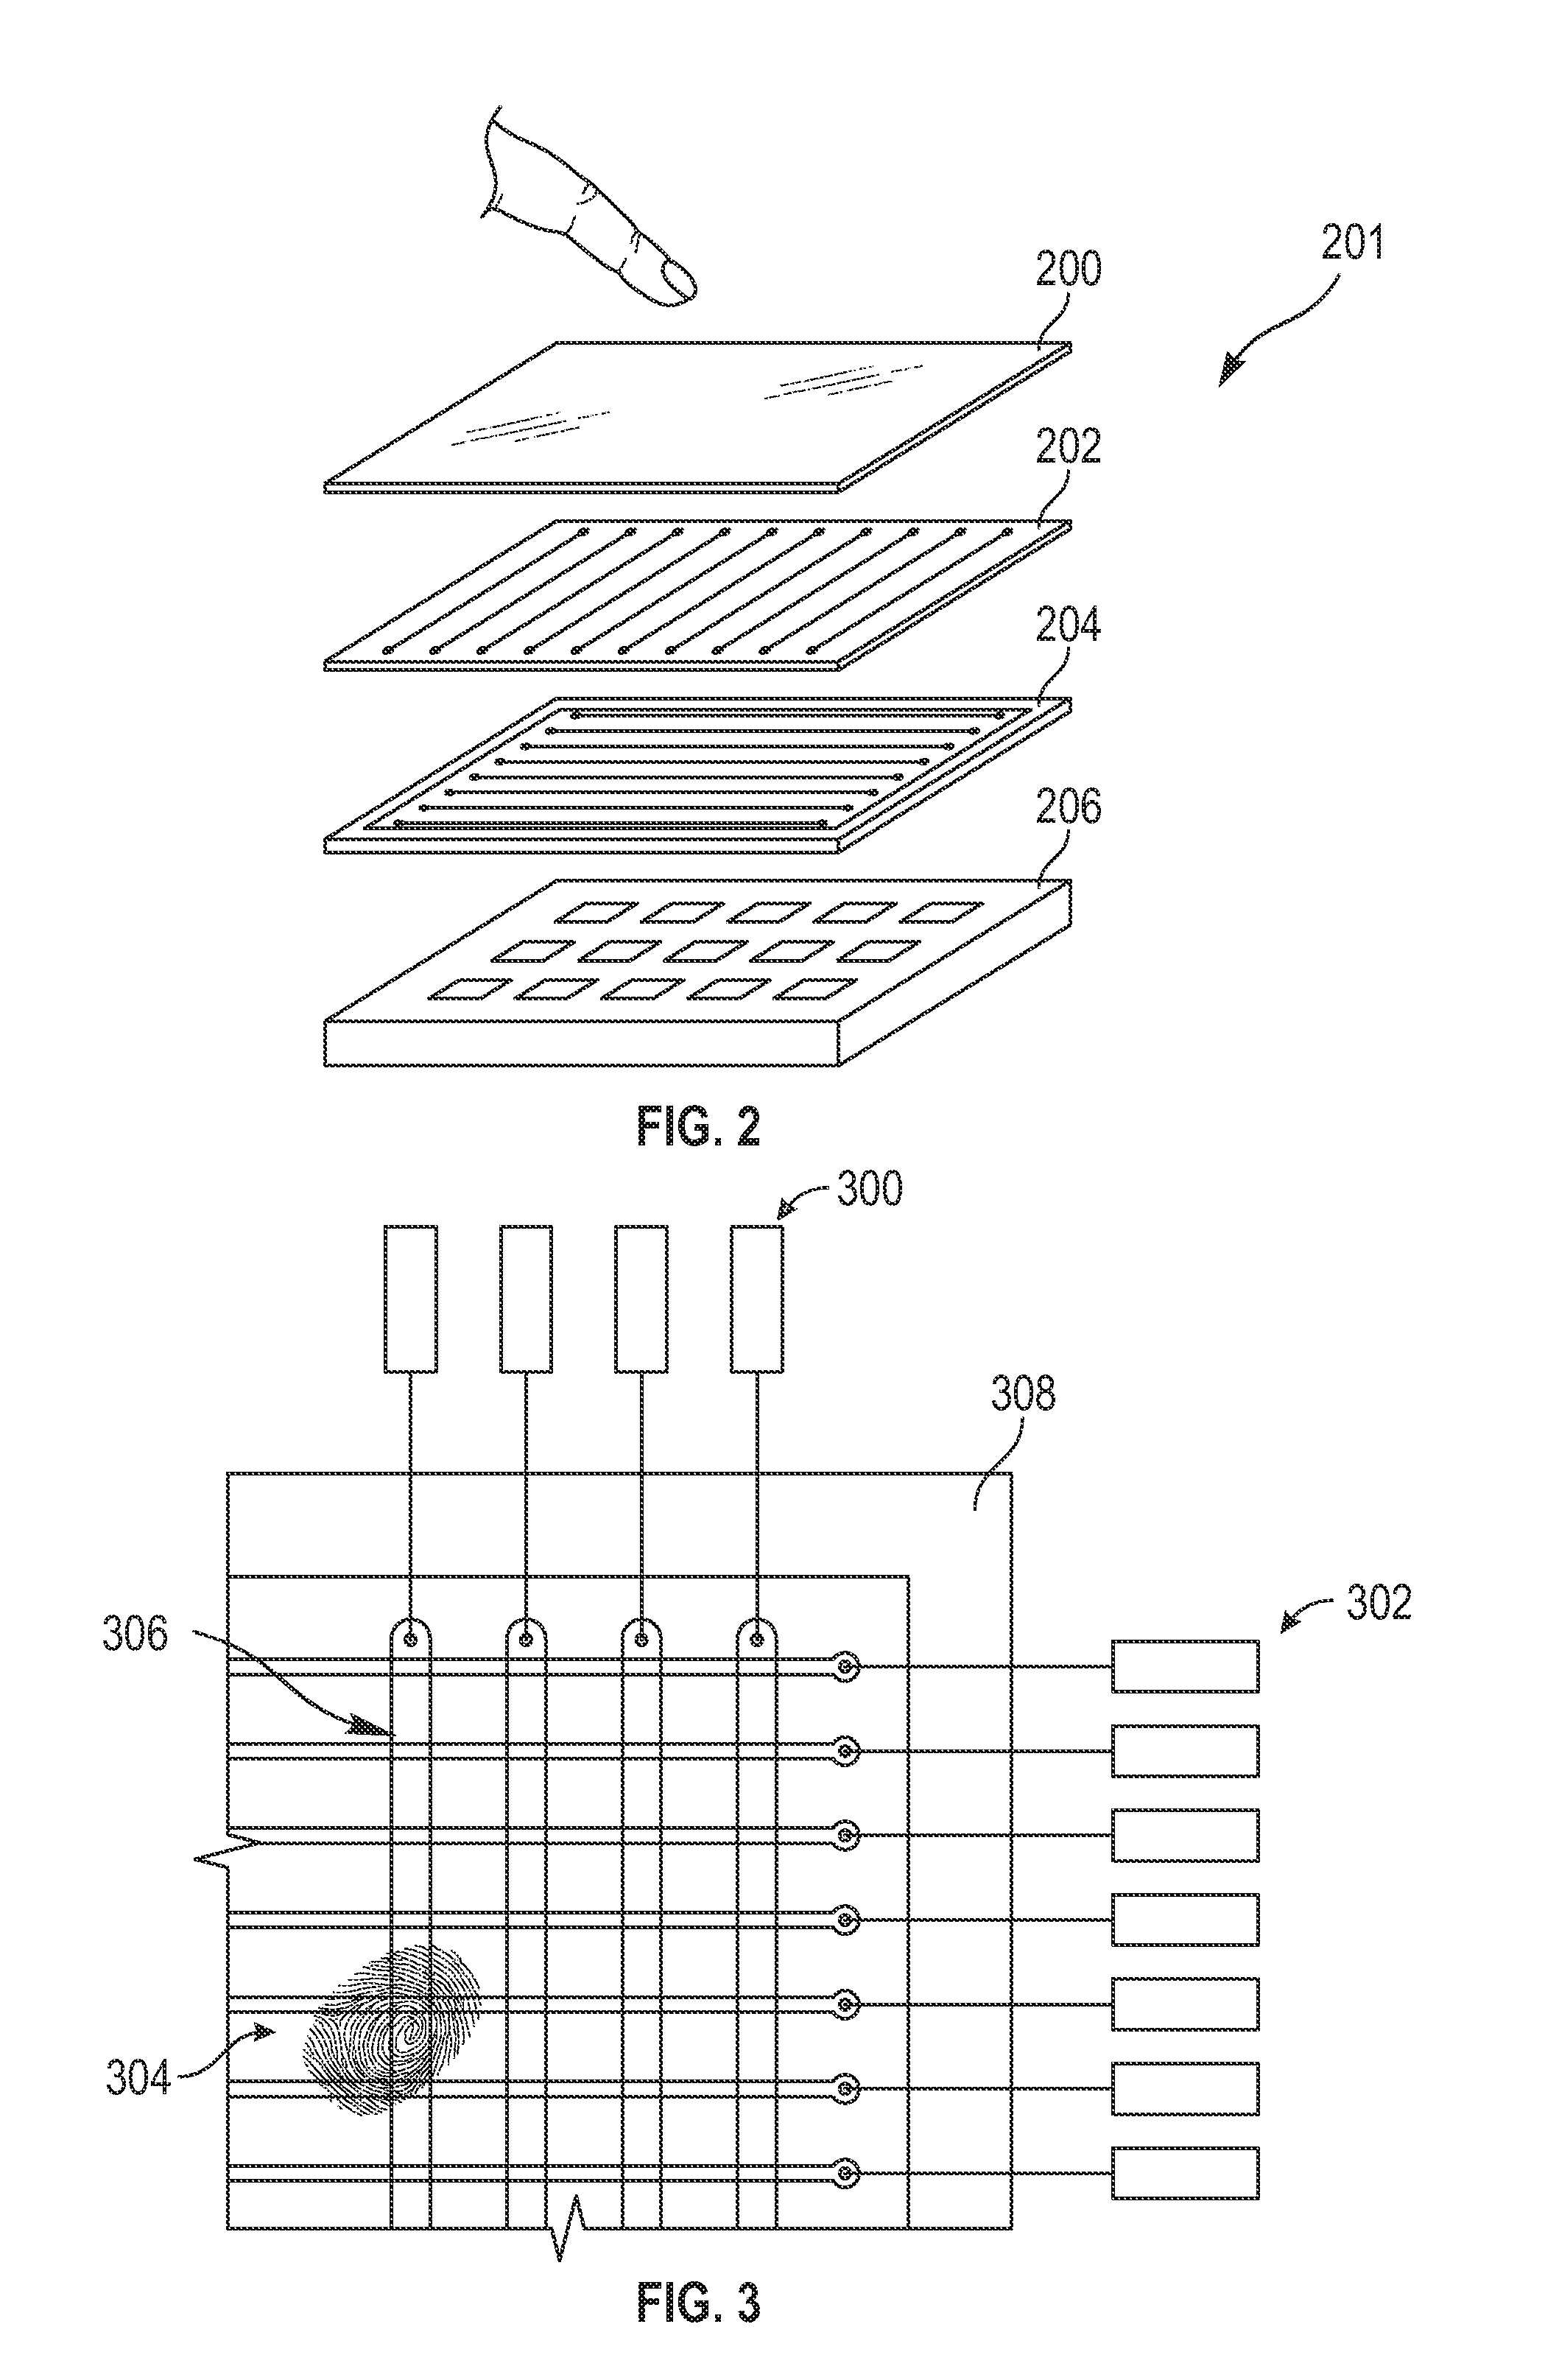 Systems and methods of moisture detection and false touch rejection on touch screen devices